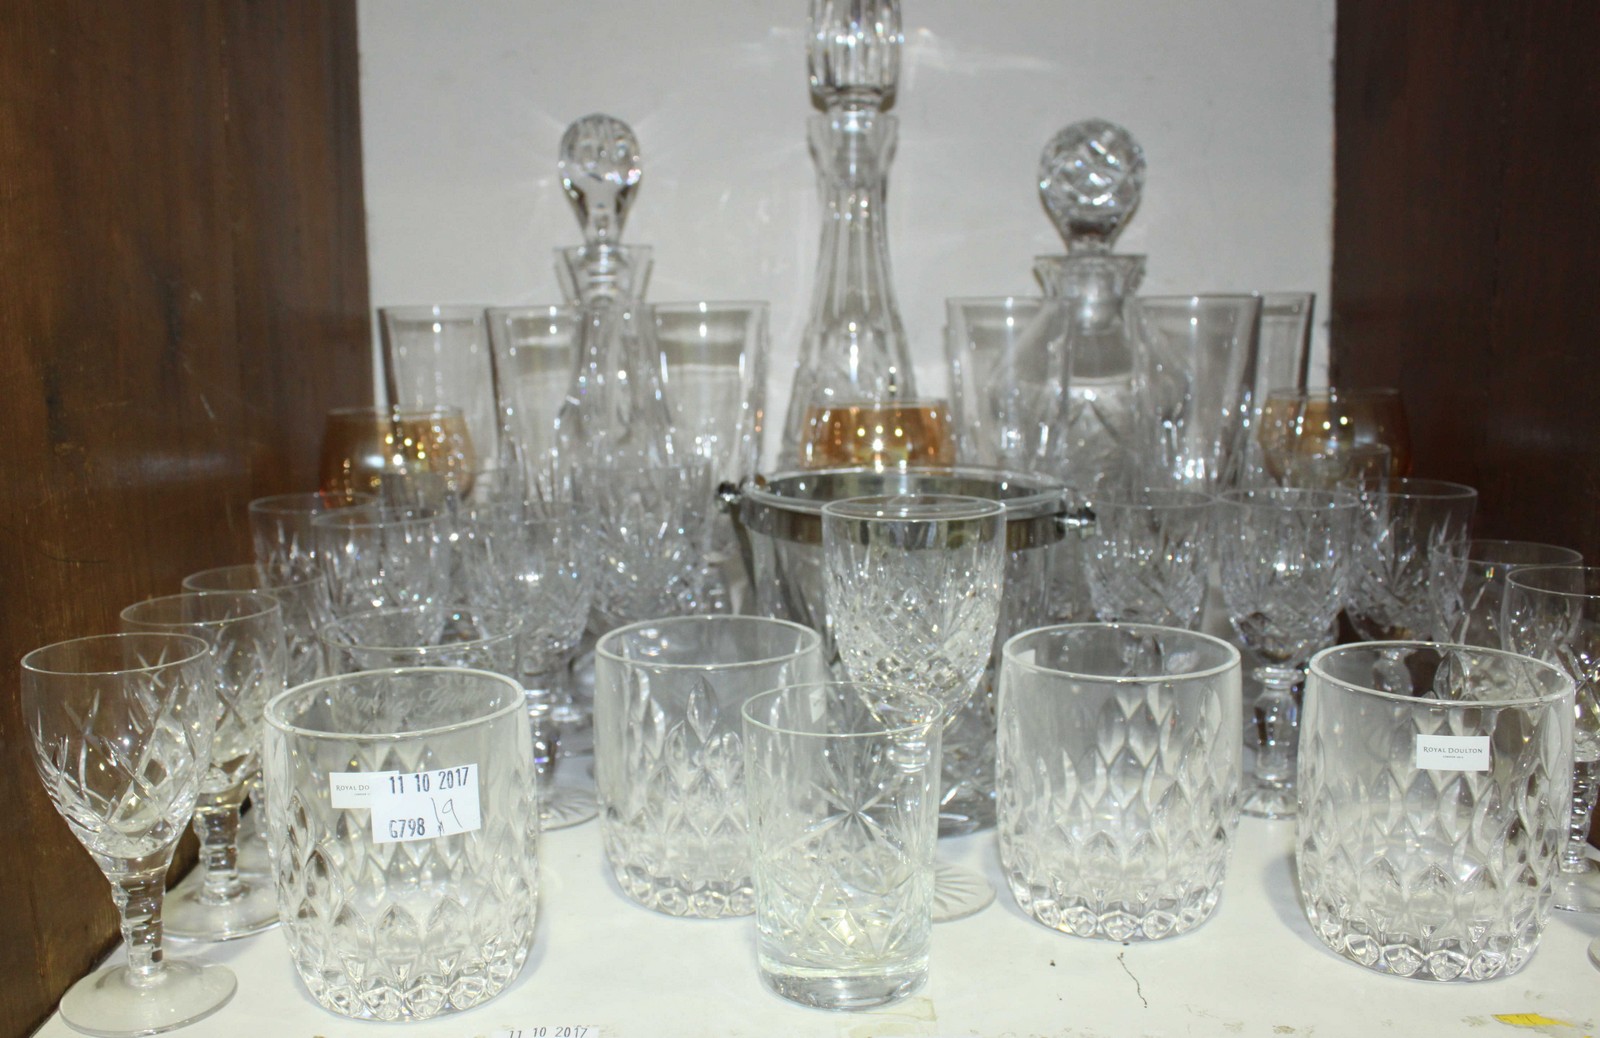 SECTION 17. A quantity of cut glass including three decanters and a set of four Royal Doulton